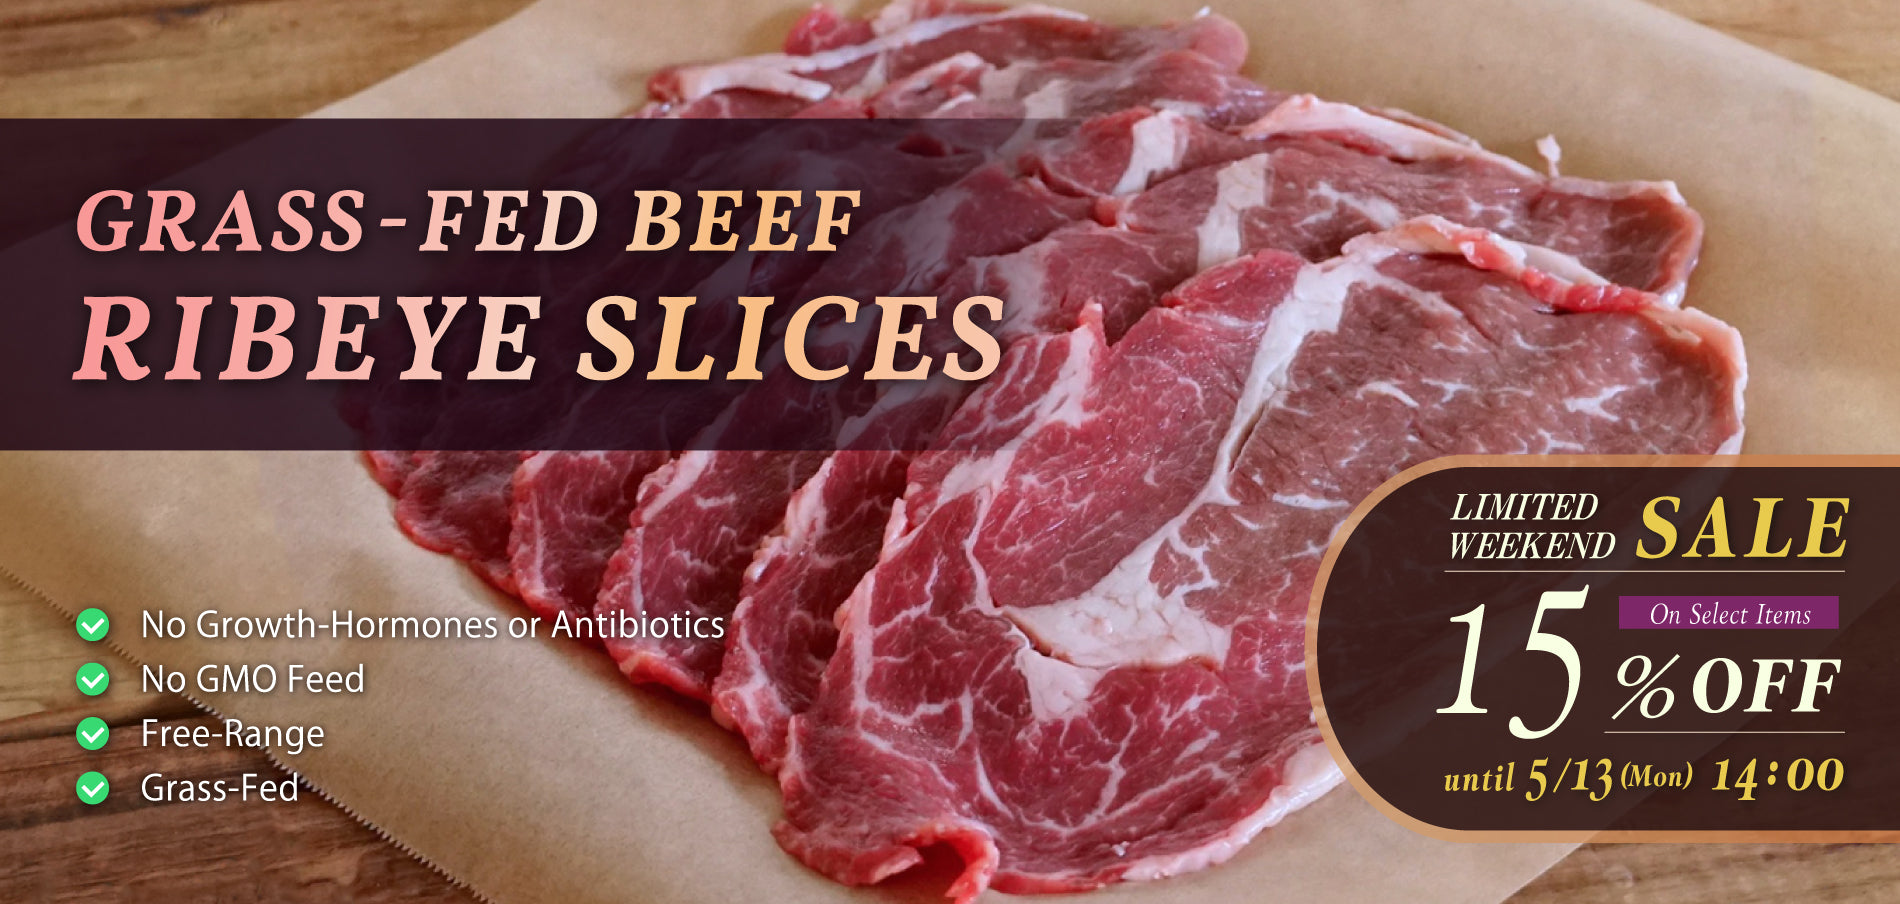 Limited Sale! 15% OFF on our Grass-Fed Beef Ribeye Slices.